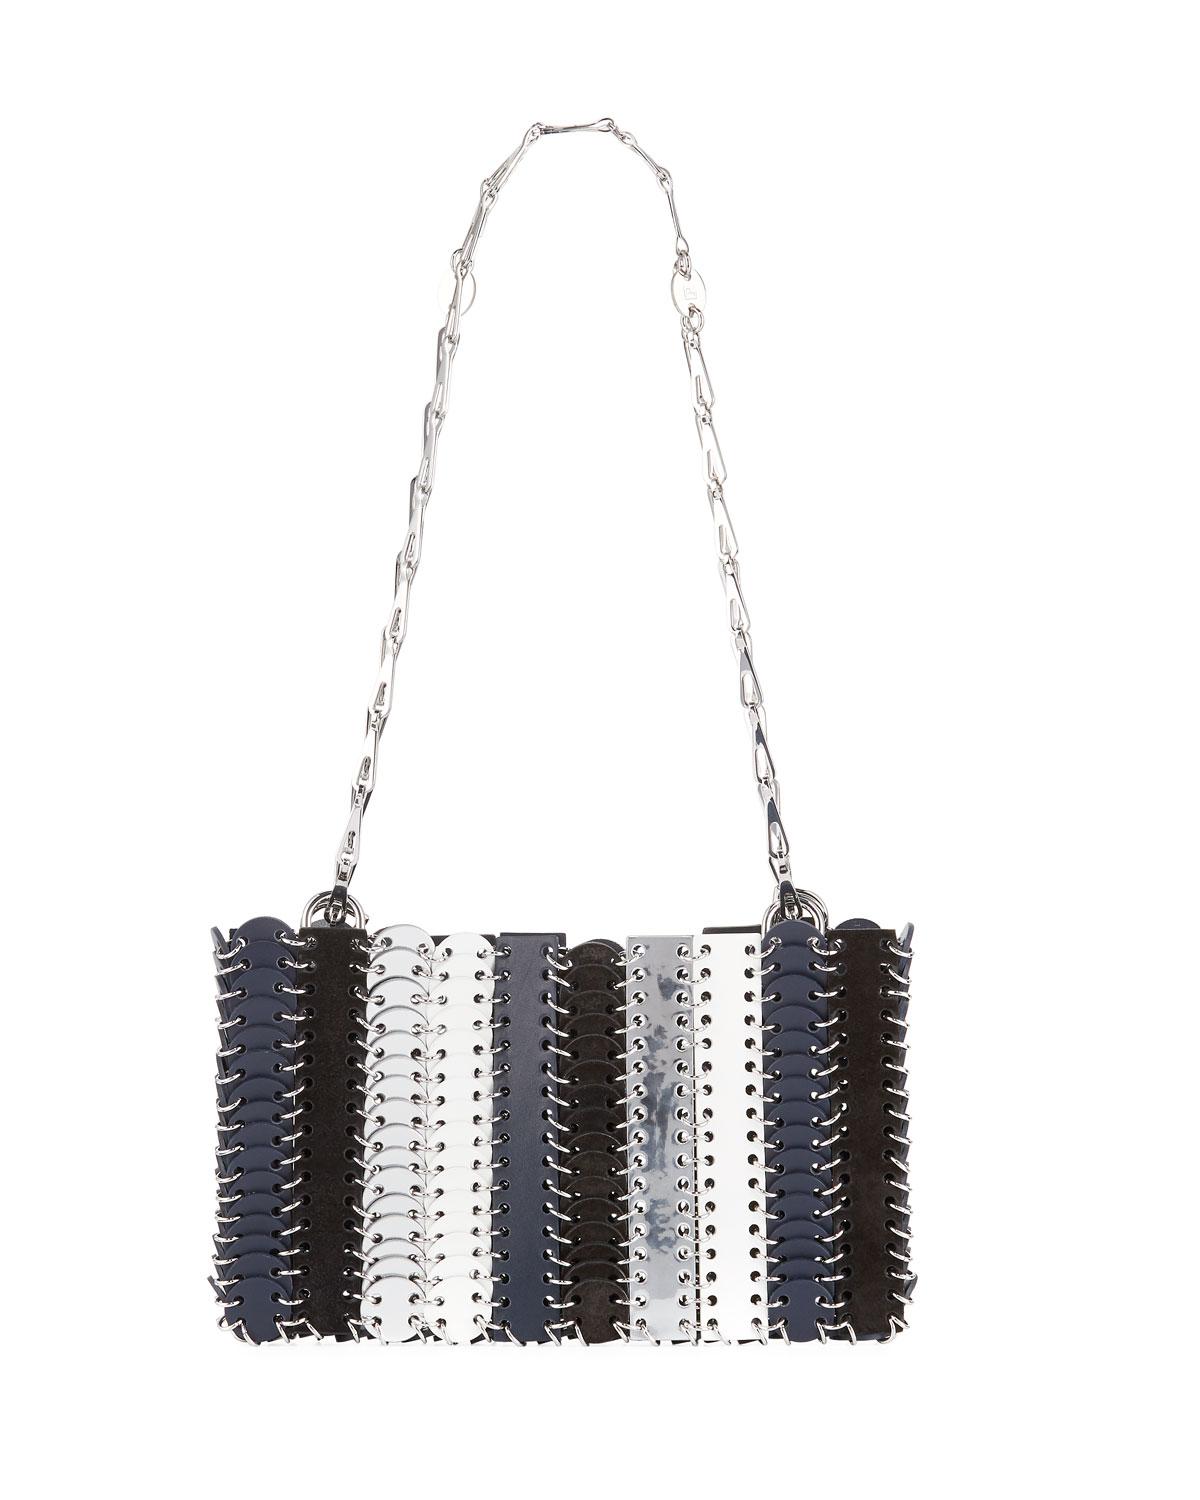 Paco Rabanne Leather Iconic Iconic Chain Shoulder Bag in Blue - Lyst